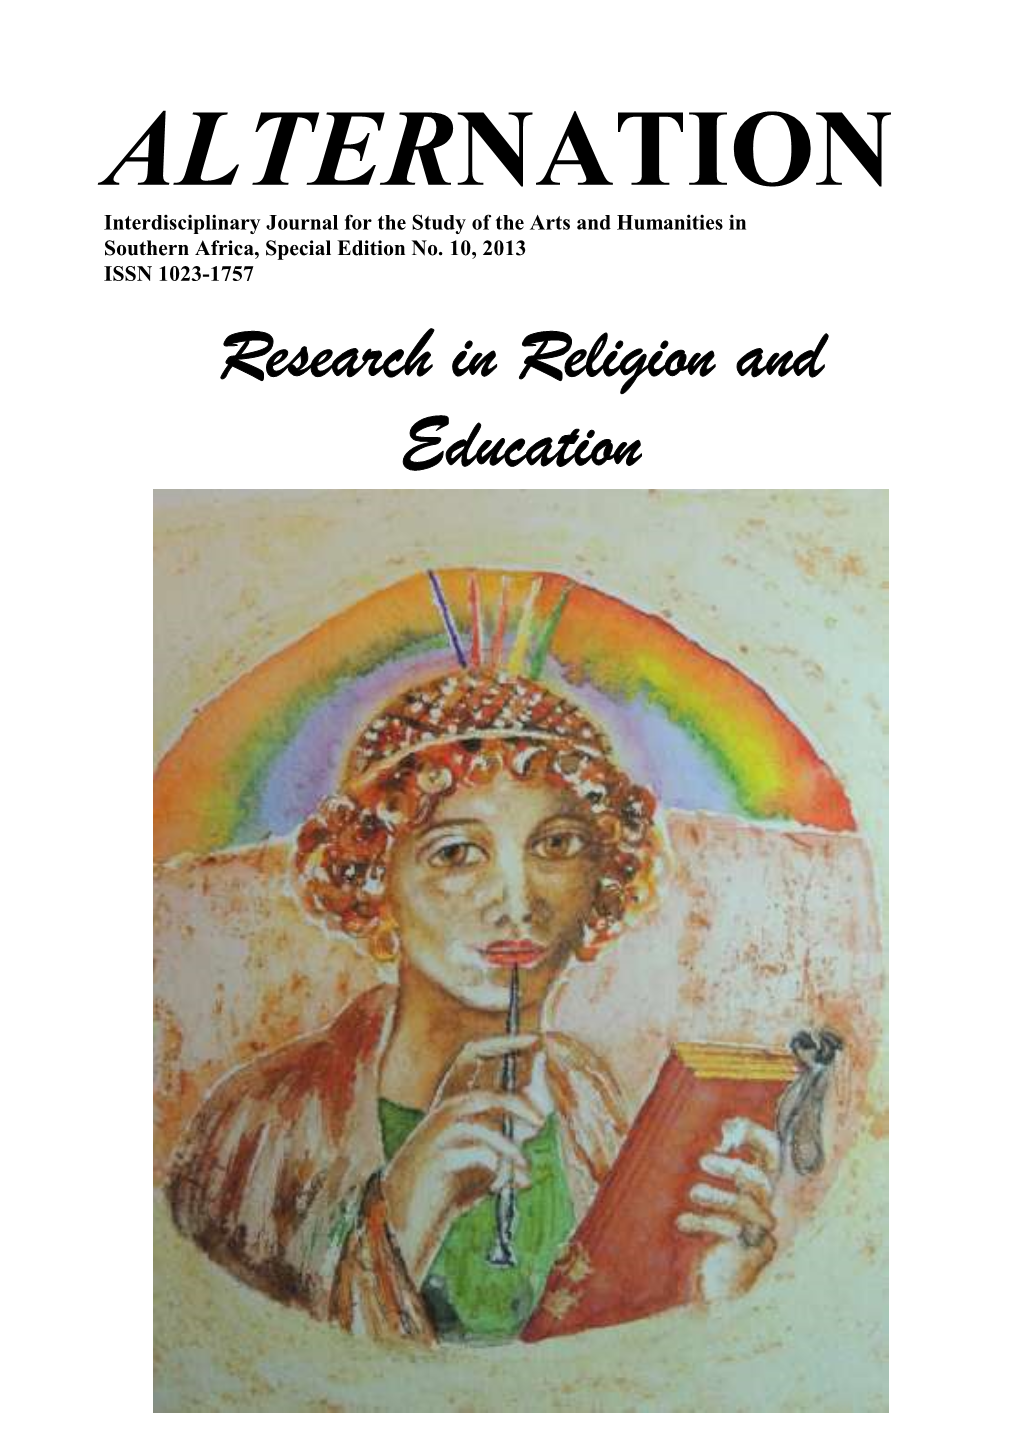 Research in Religion and Education